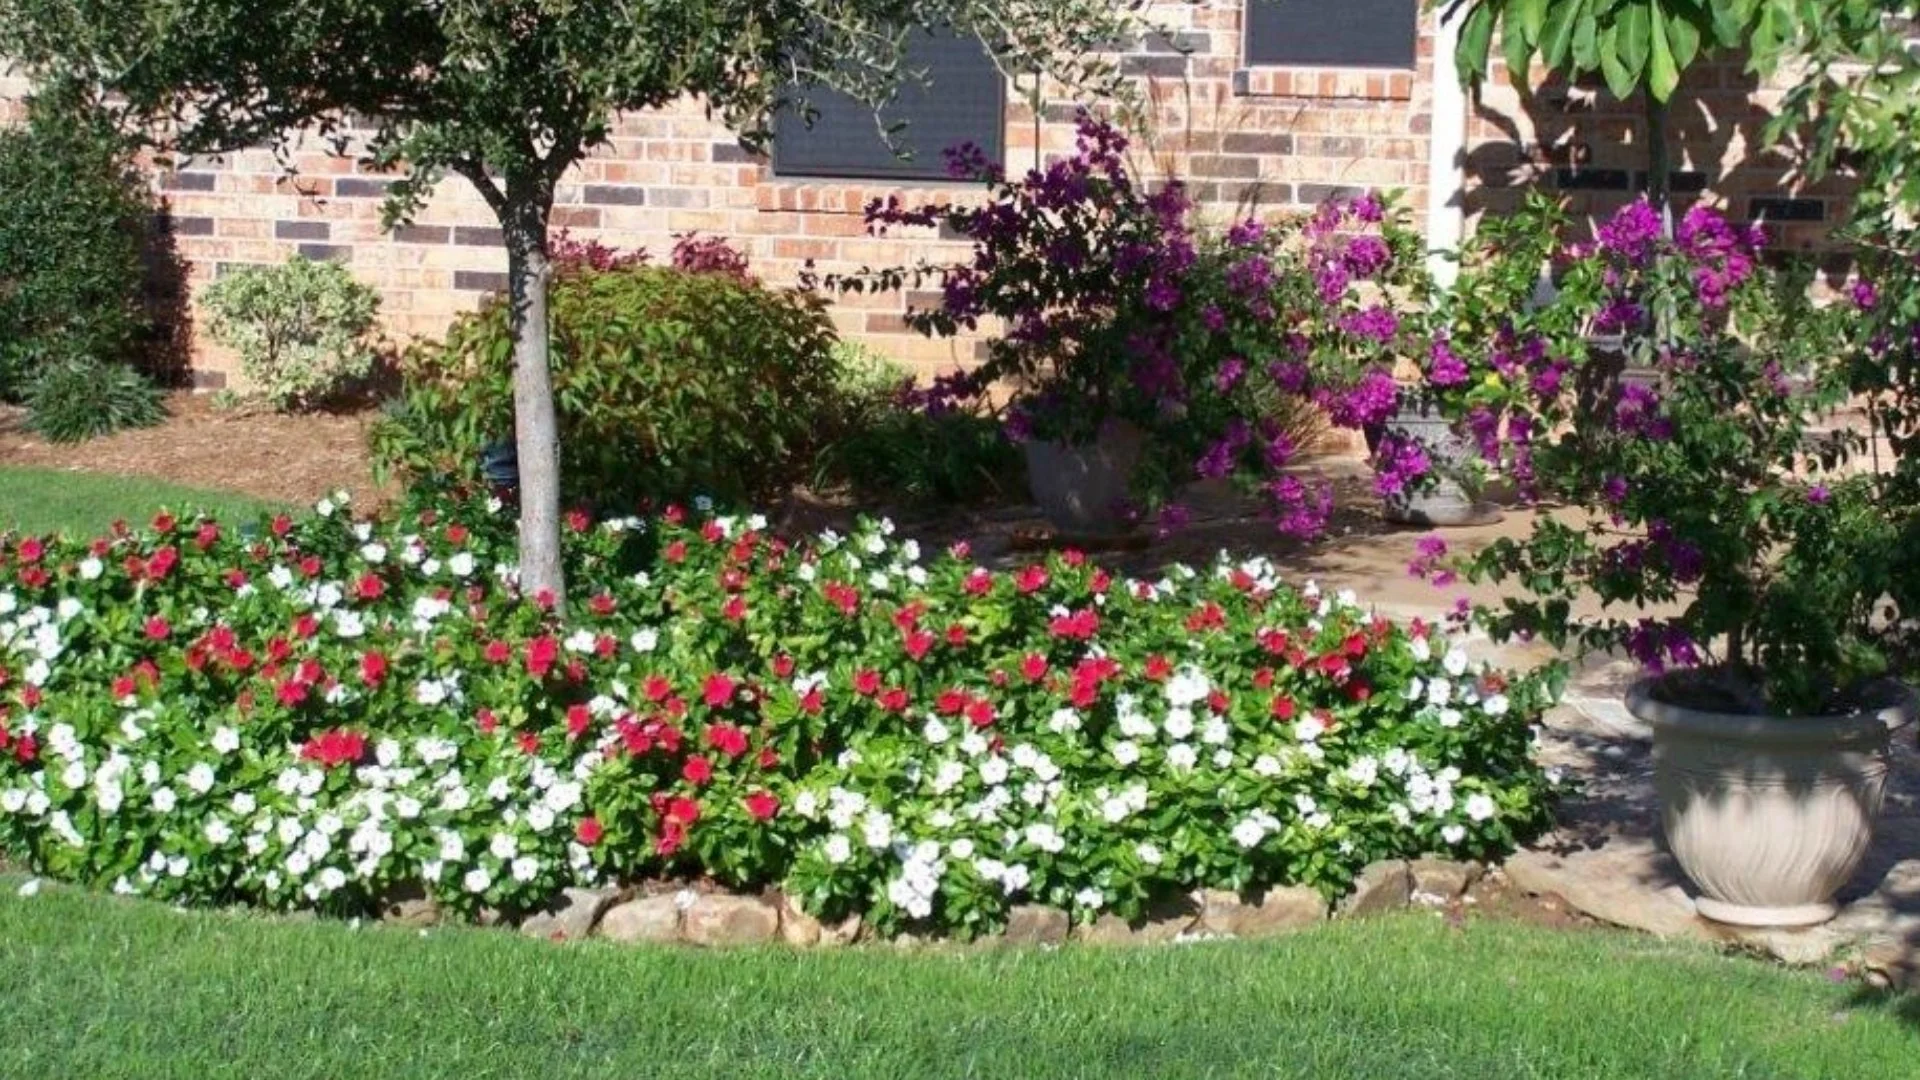 What Annual Flowers Are Best for the Fall in China Spring, TX?